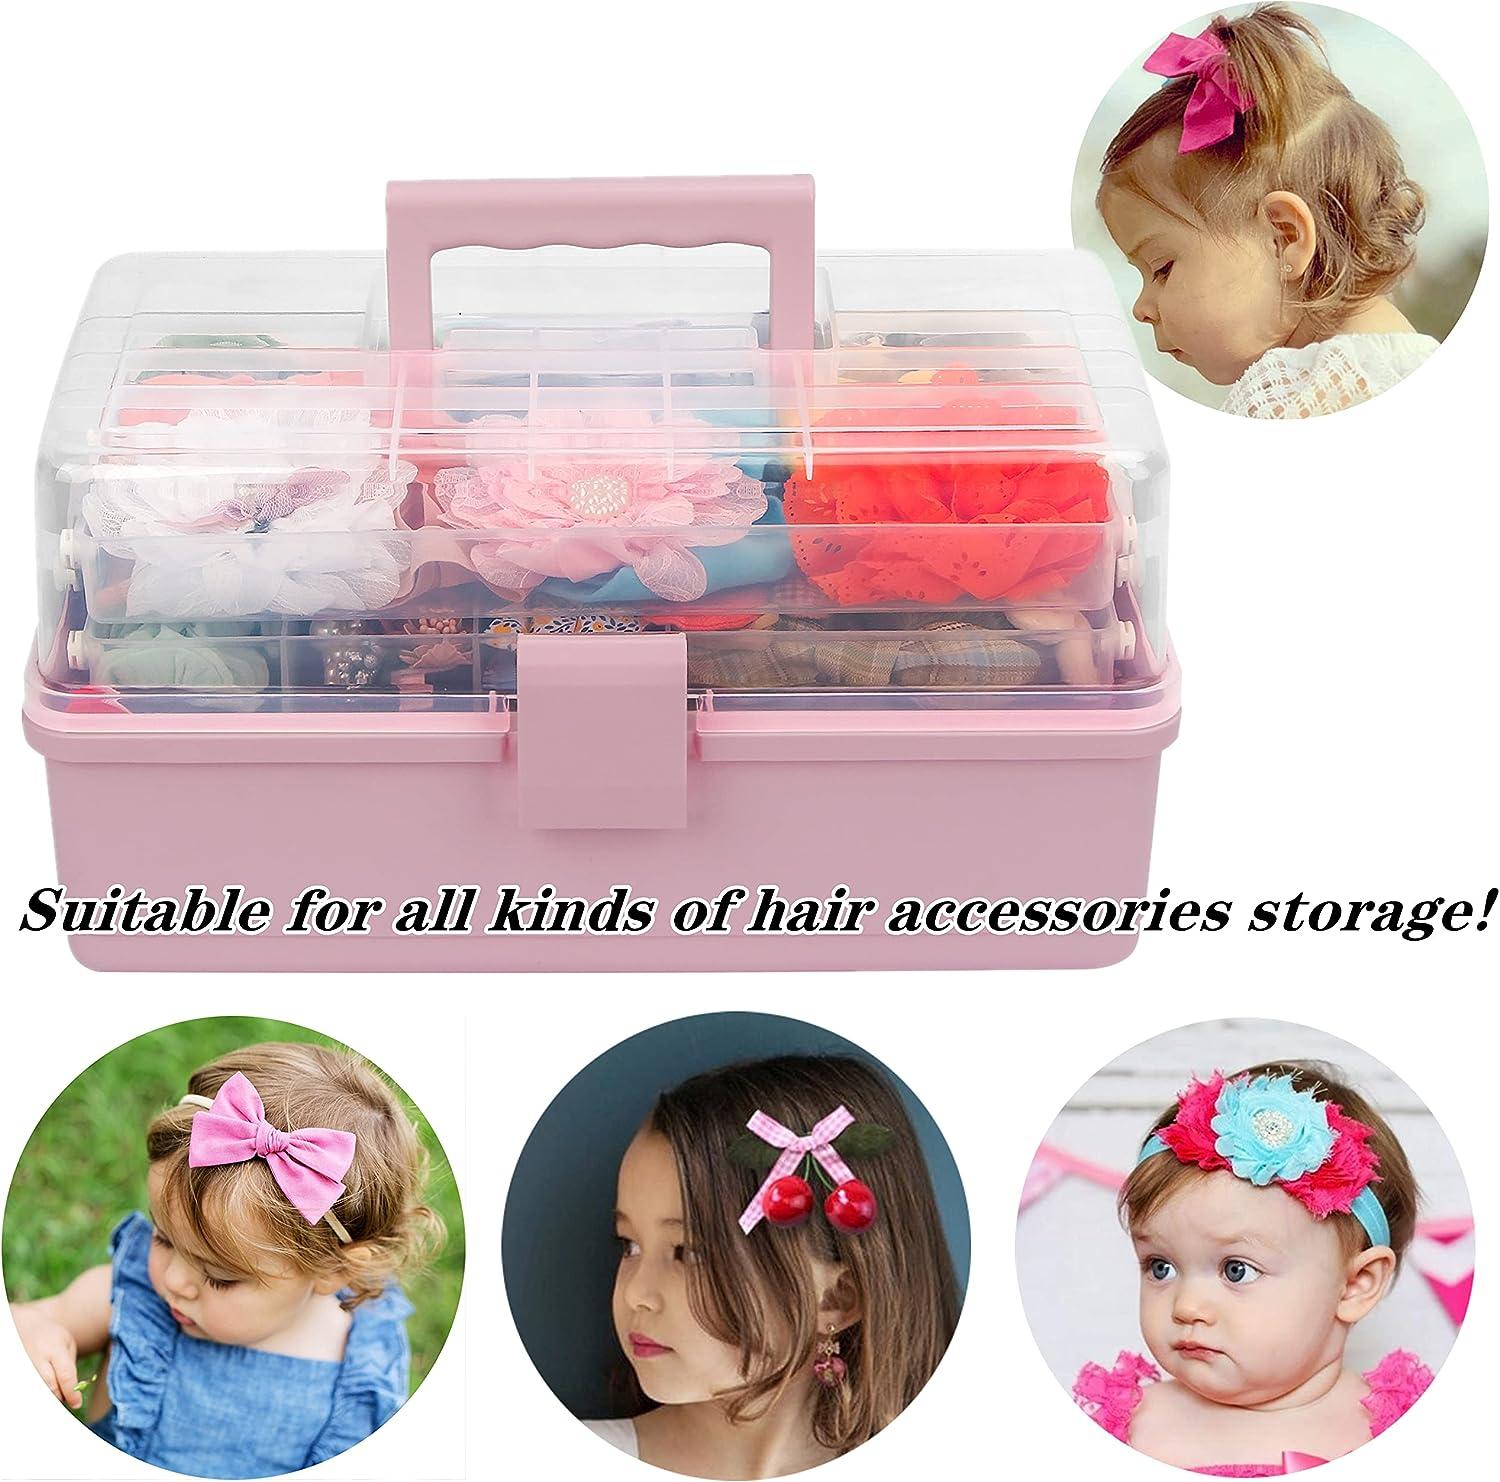  MASKMELLOW Shapeazy Hair Accessories Organizer for Girls,3-Layers  Plastic Box with Fold Tray and Handle, Portable Lockable Container for Art  Supply, Makeup, Nail, Hair Accessories : Beauty & Personal Care